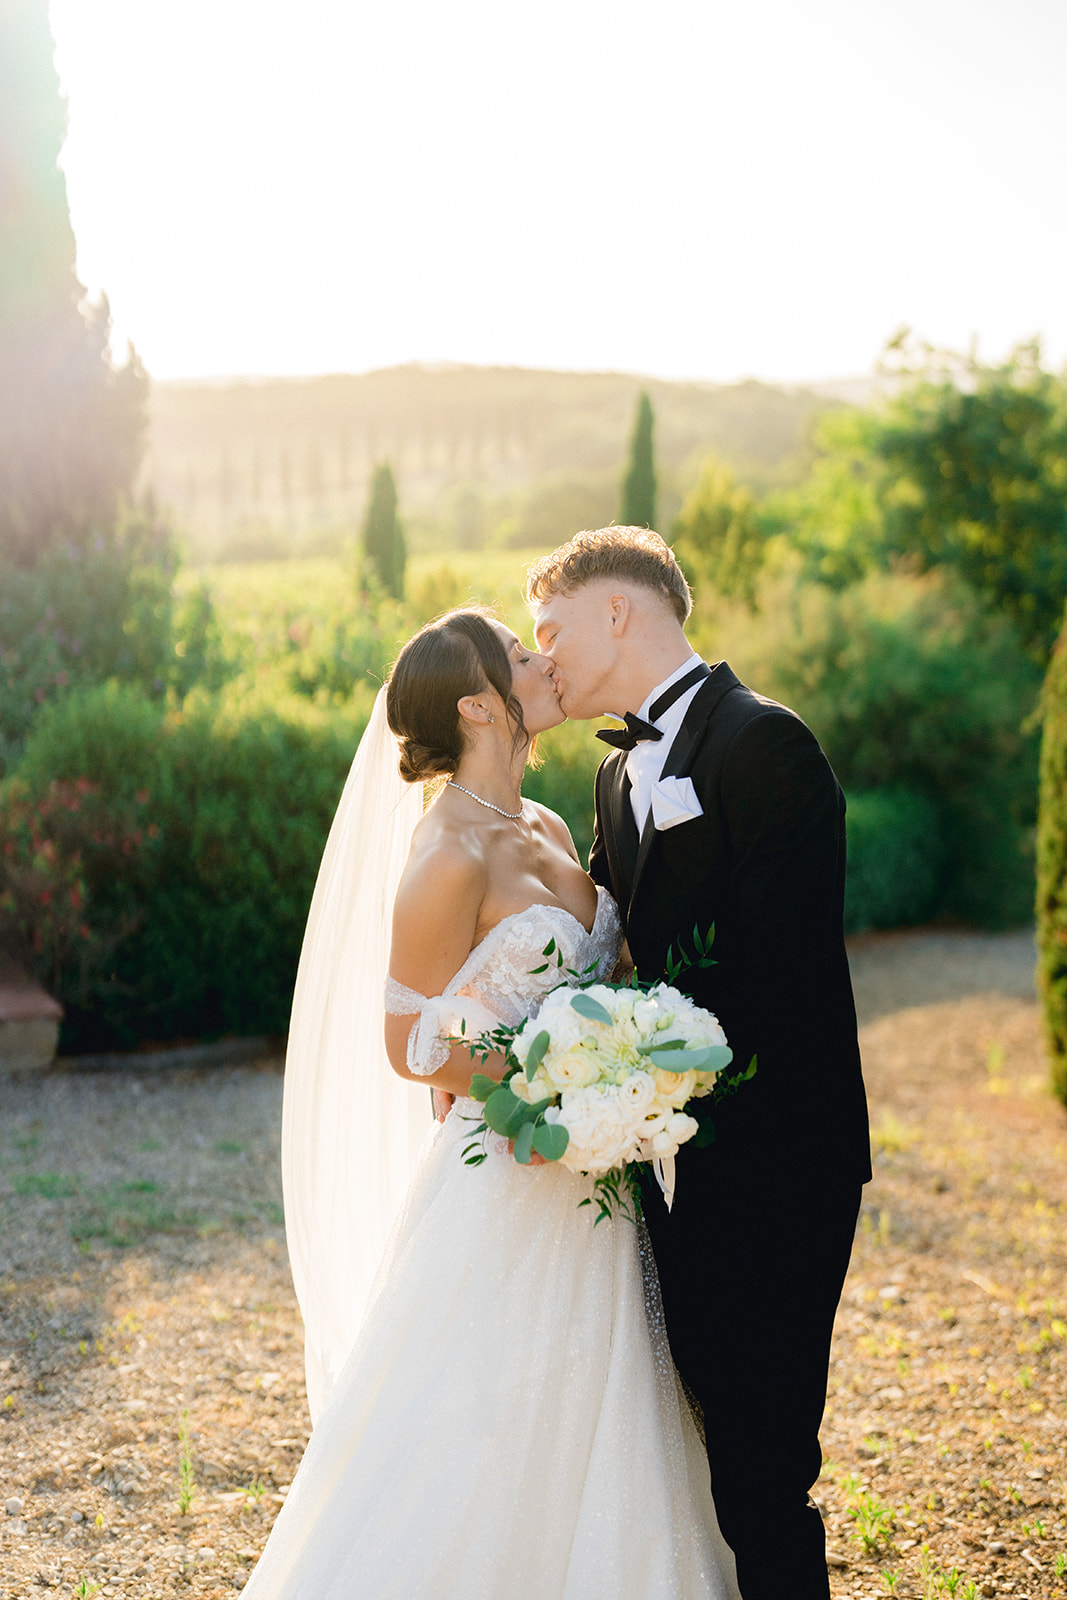 A kiss from the newlyweds under the Tuscan sunset